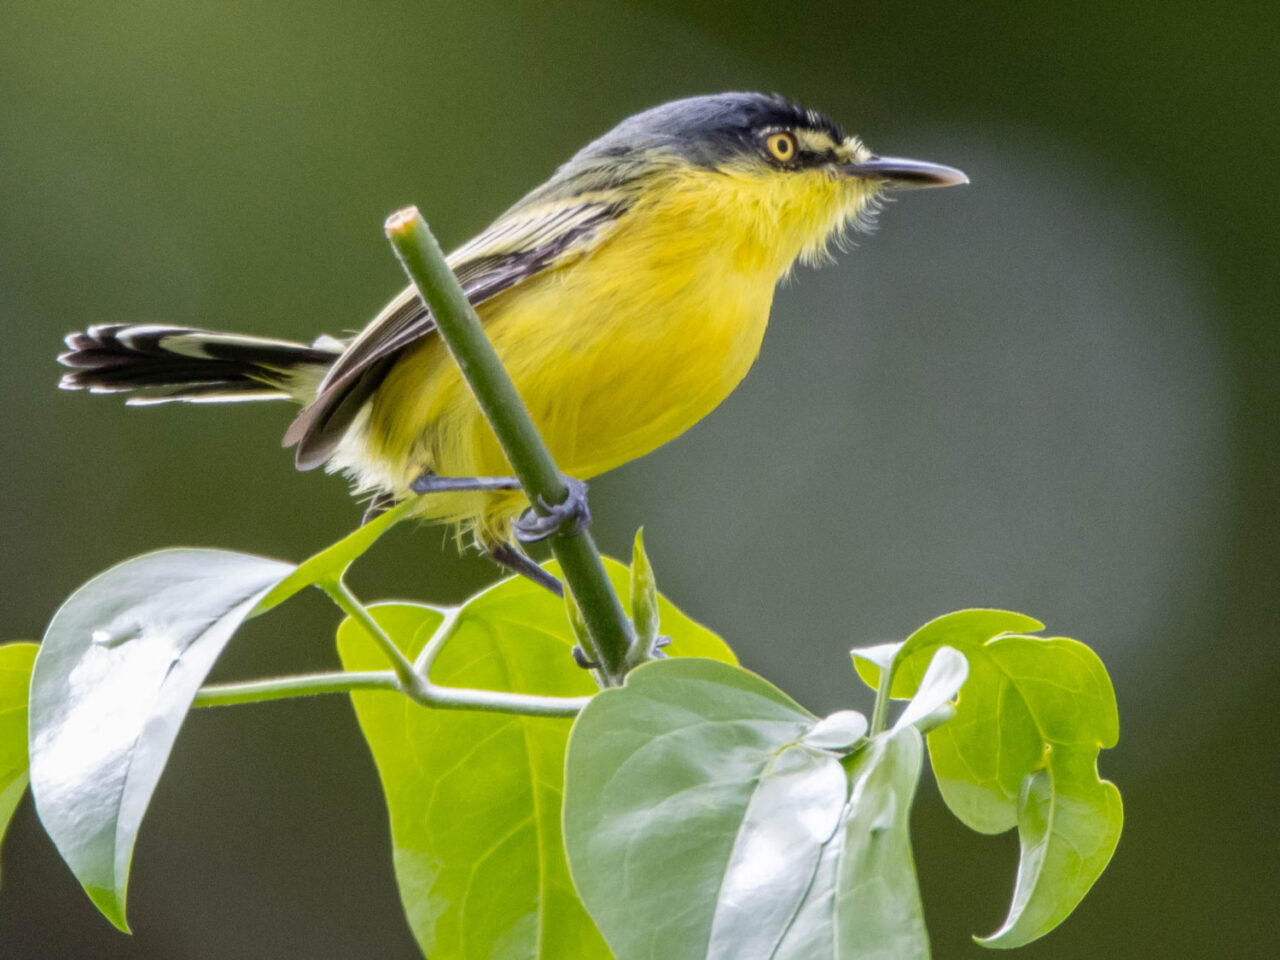 a small yellow and gray bird with a black head sits on leafy vegetation